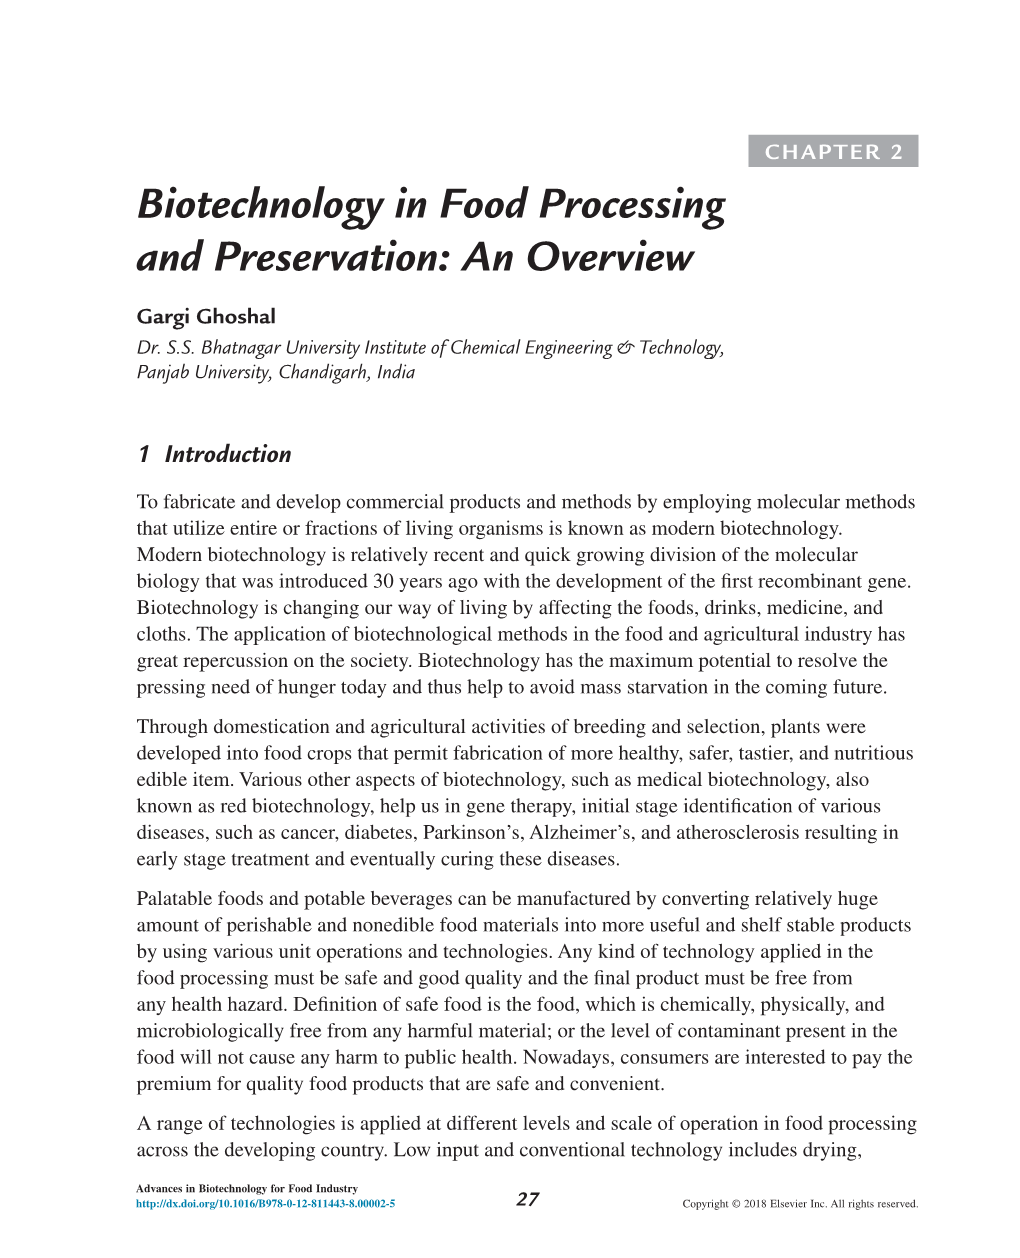 CHAPTER 2 Biotechnology in Food Processing and Preservation: an Overview